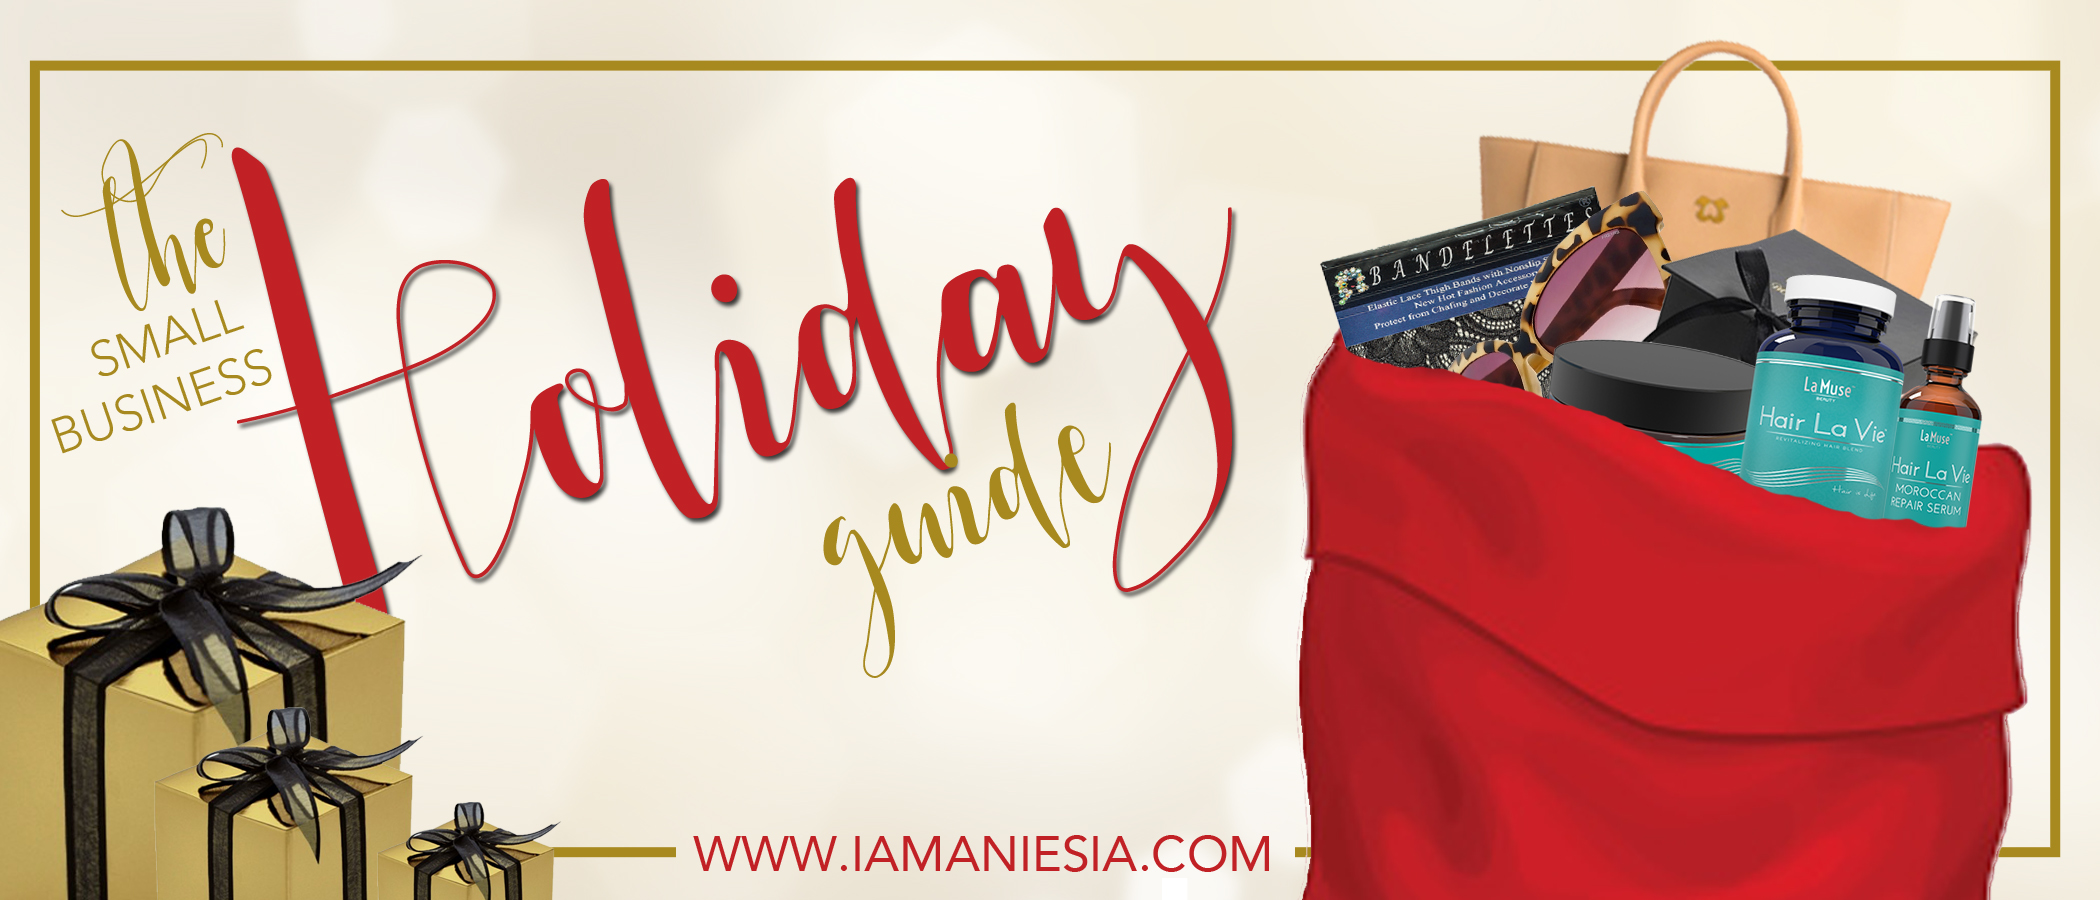 2015 Holiday Shopping Guide